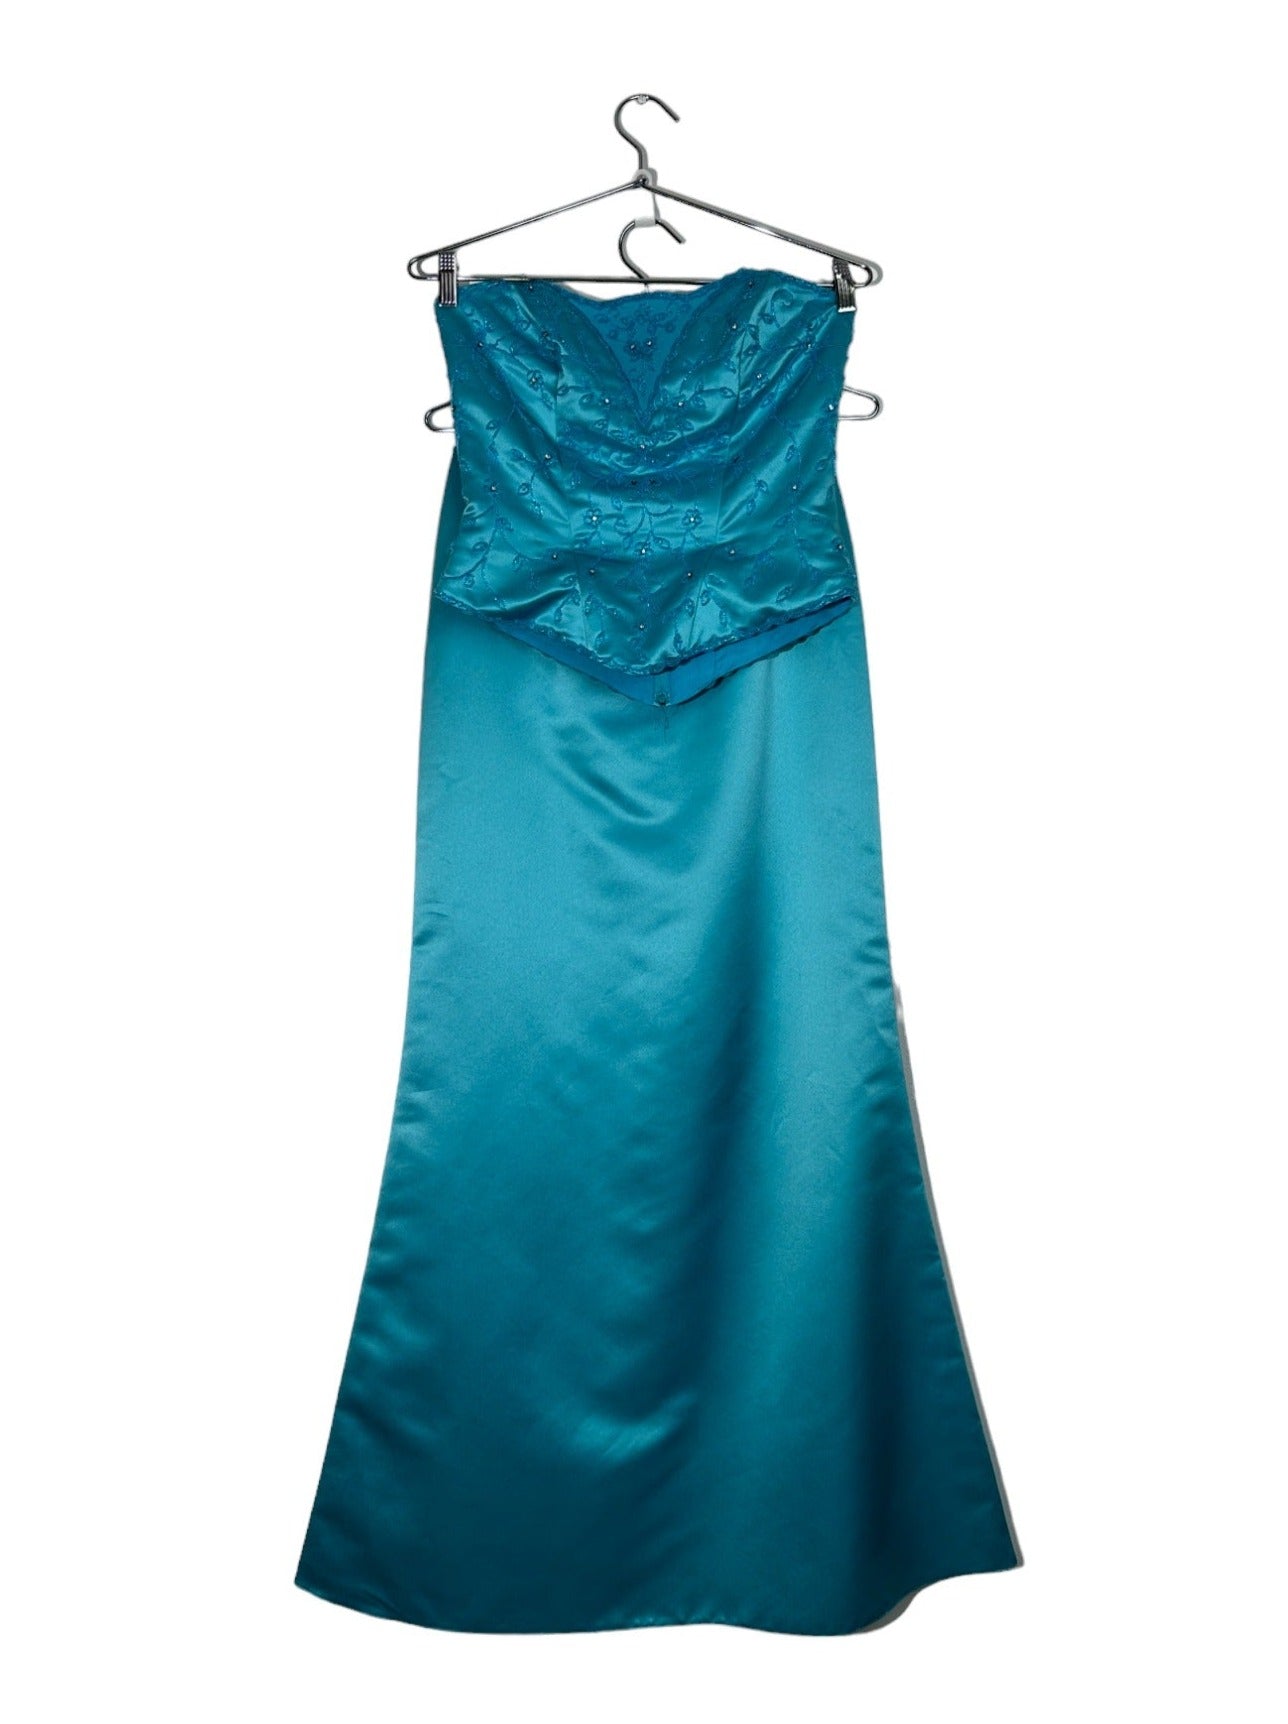 Teal Floral Beaded Strapless Top & Maxi Skirt Set